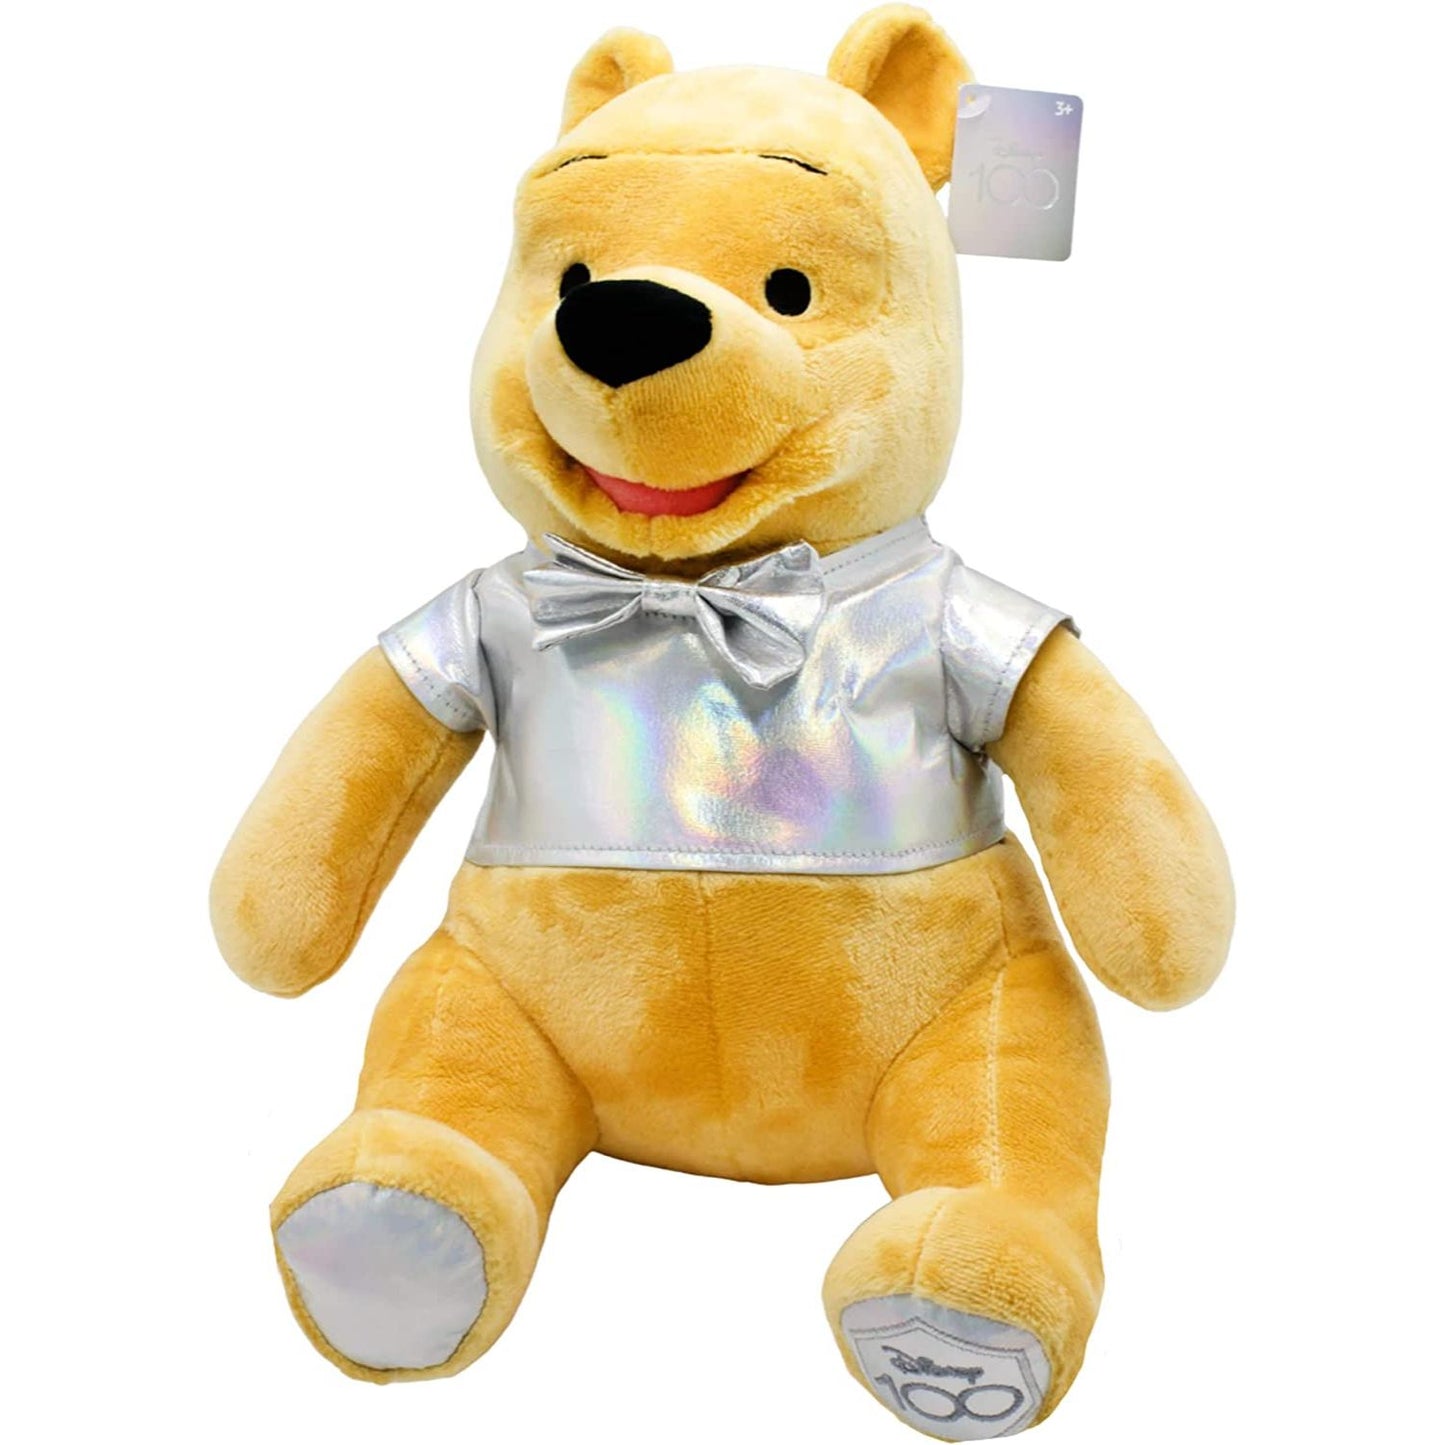 Disney - 100th Celebration - Exclusive Winnie The Pooh 14In Push Toy - Heretoserveyou